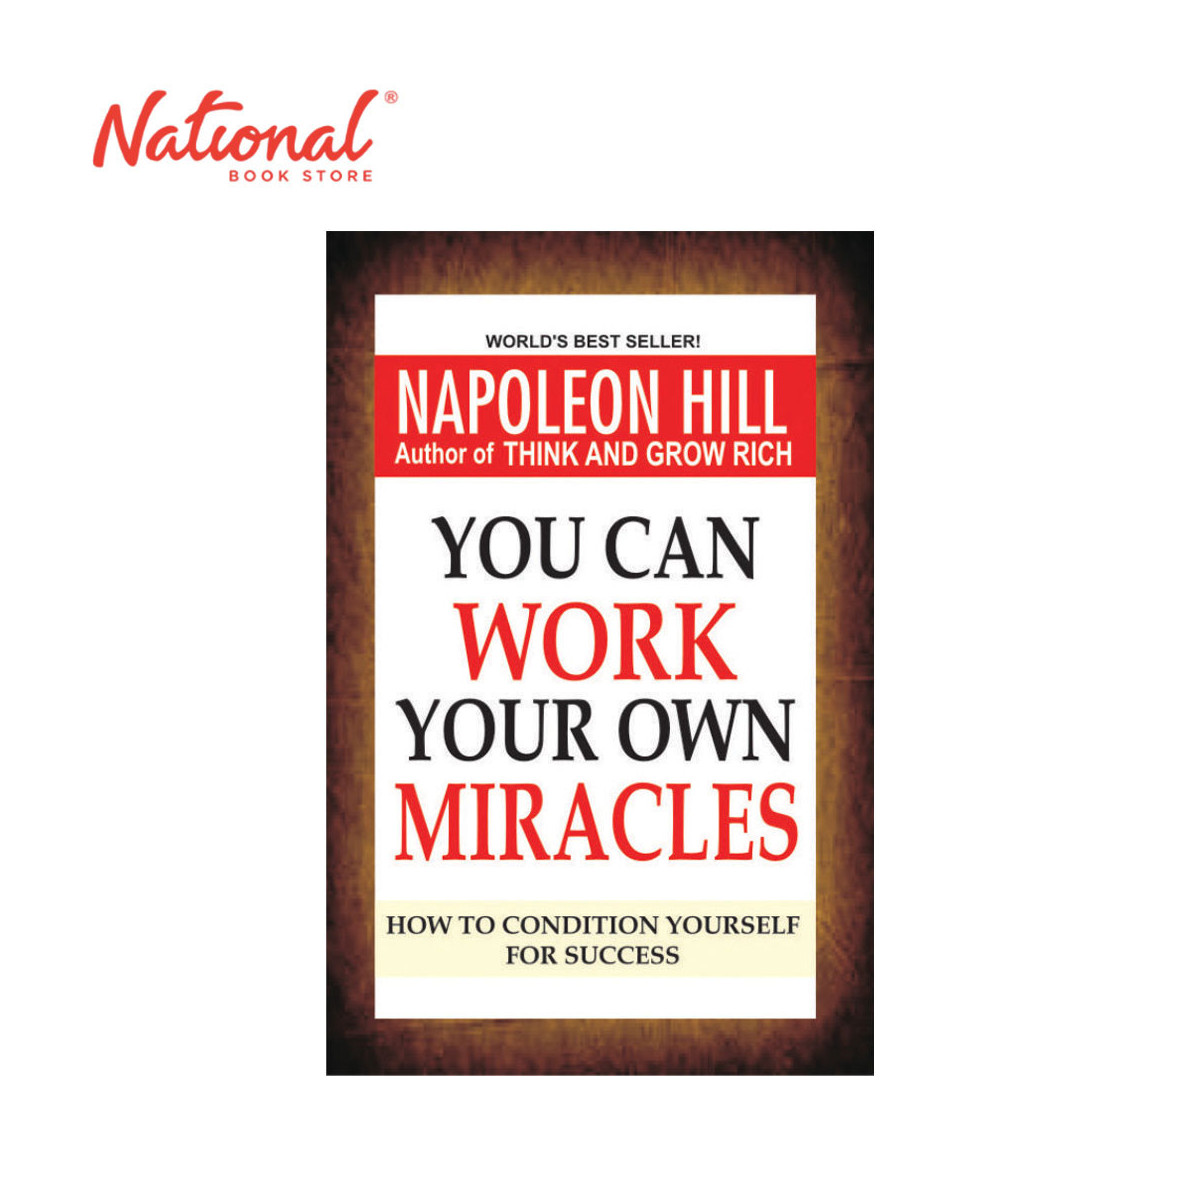 You Can Work Your Own Miracles by Napoleon Hill - Trade Paperback - Self-Help Books